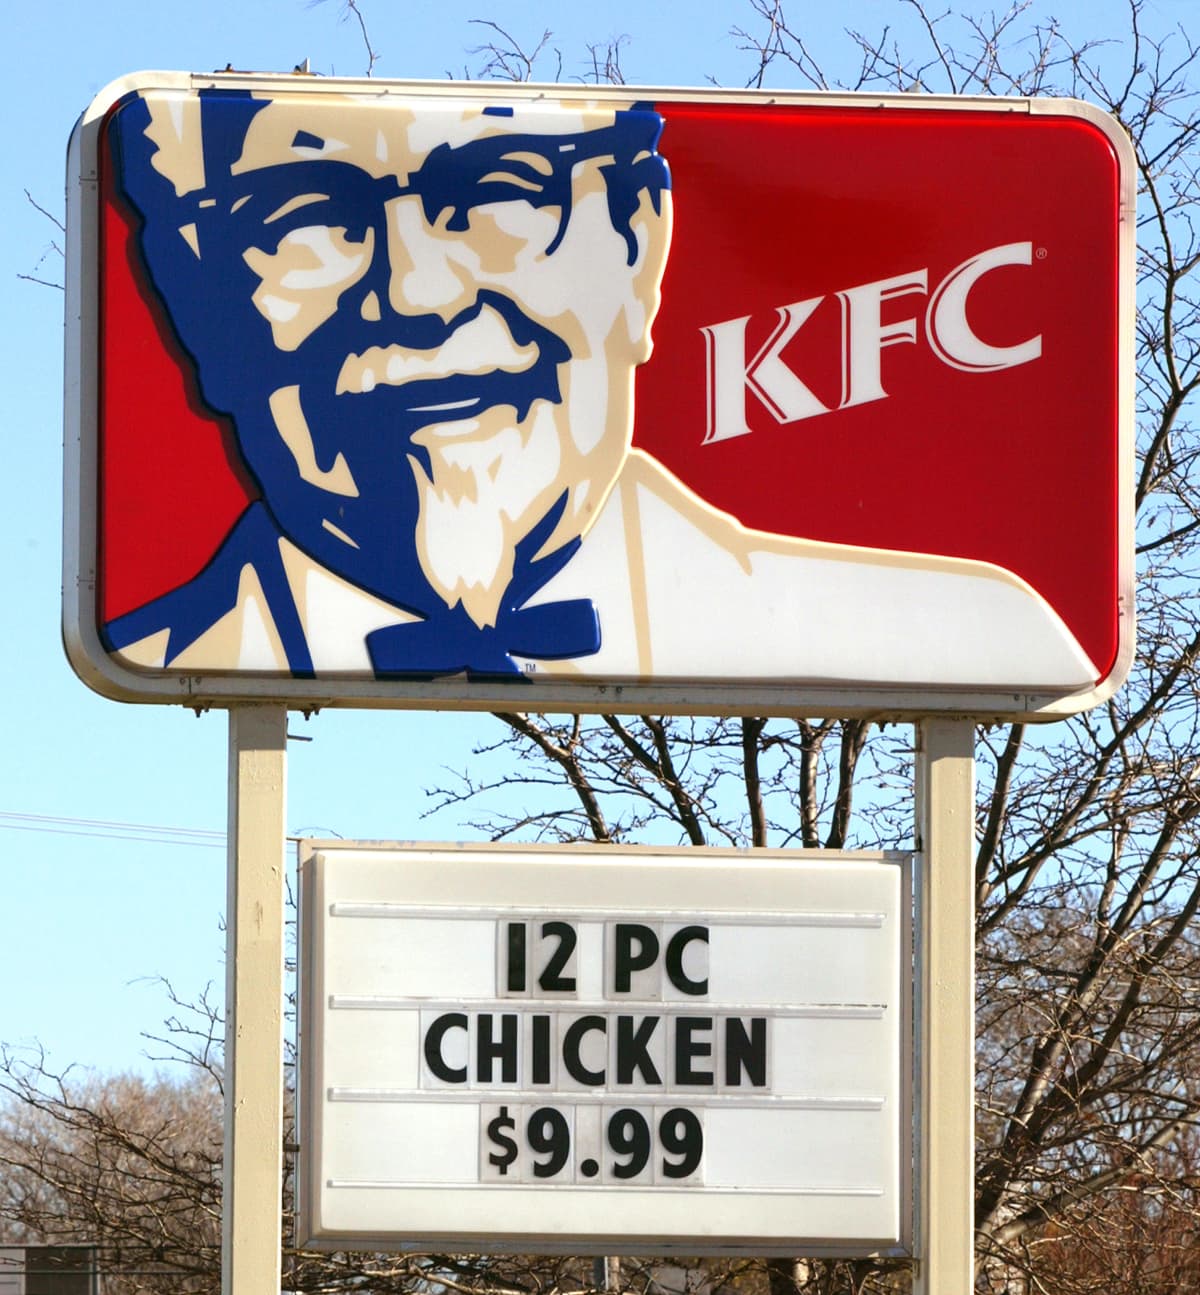 Banner sign Colonel Sanders advertising KFC  Kentucky Fried Chicken Drive Thru outlet, Martlesham, Suffolk, England, UK. (Photo by: Geography Photos/UCG/Universal Images Group via Getty Images)